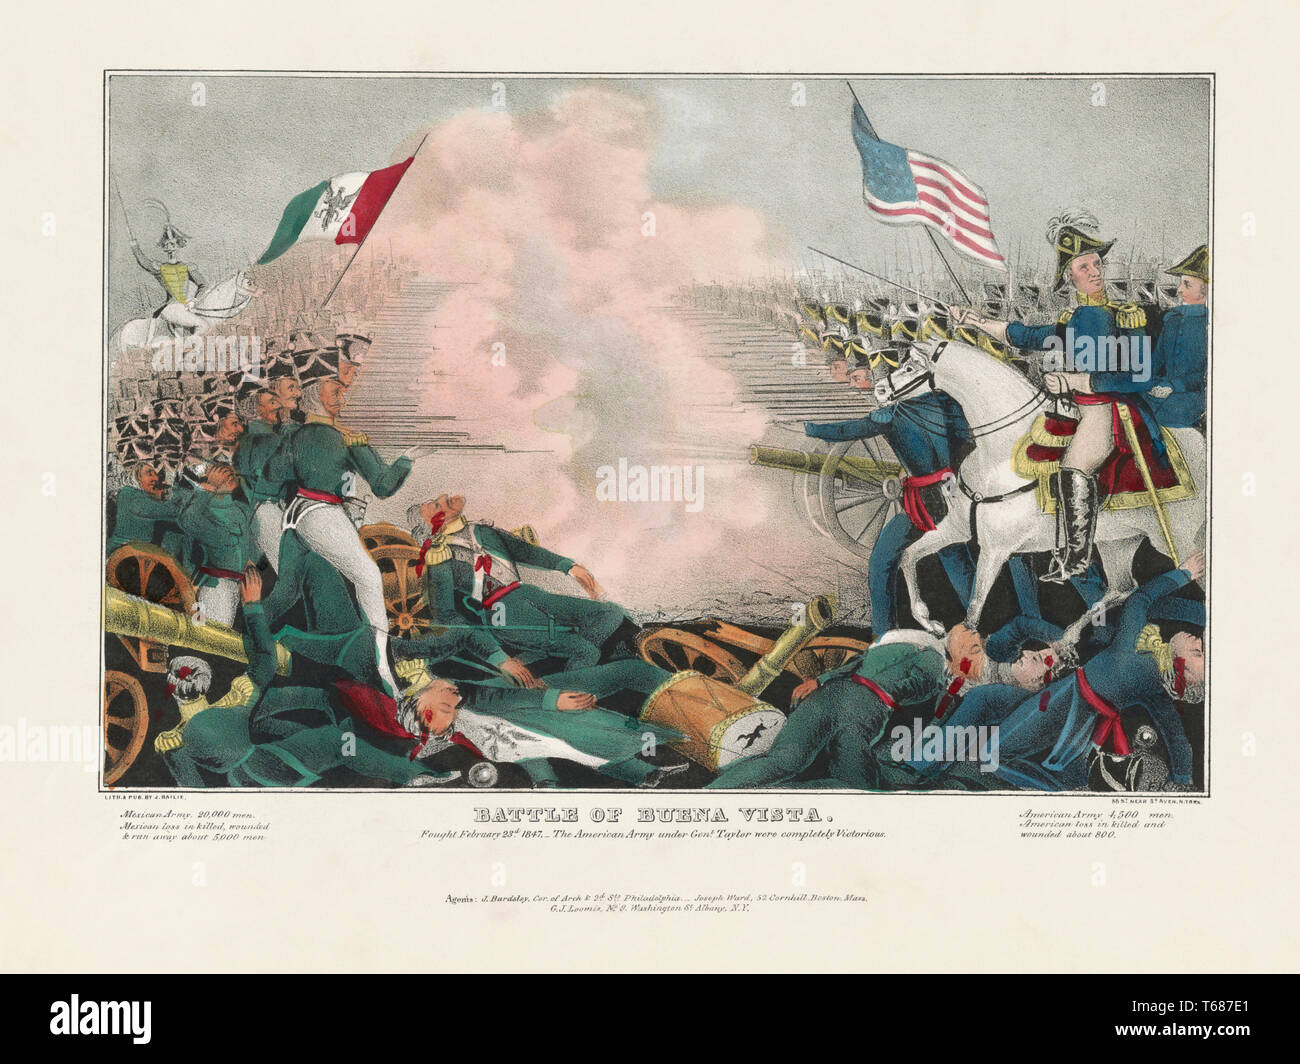 Battle of Buena Vista, Fought February 23rd, 1847, The American Army under Genl. Taylor were Completely Victorious, Lithograph by J. Bailie Stock Photo